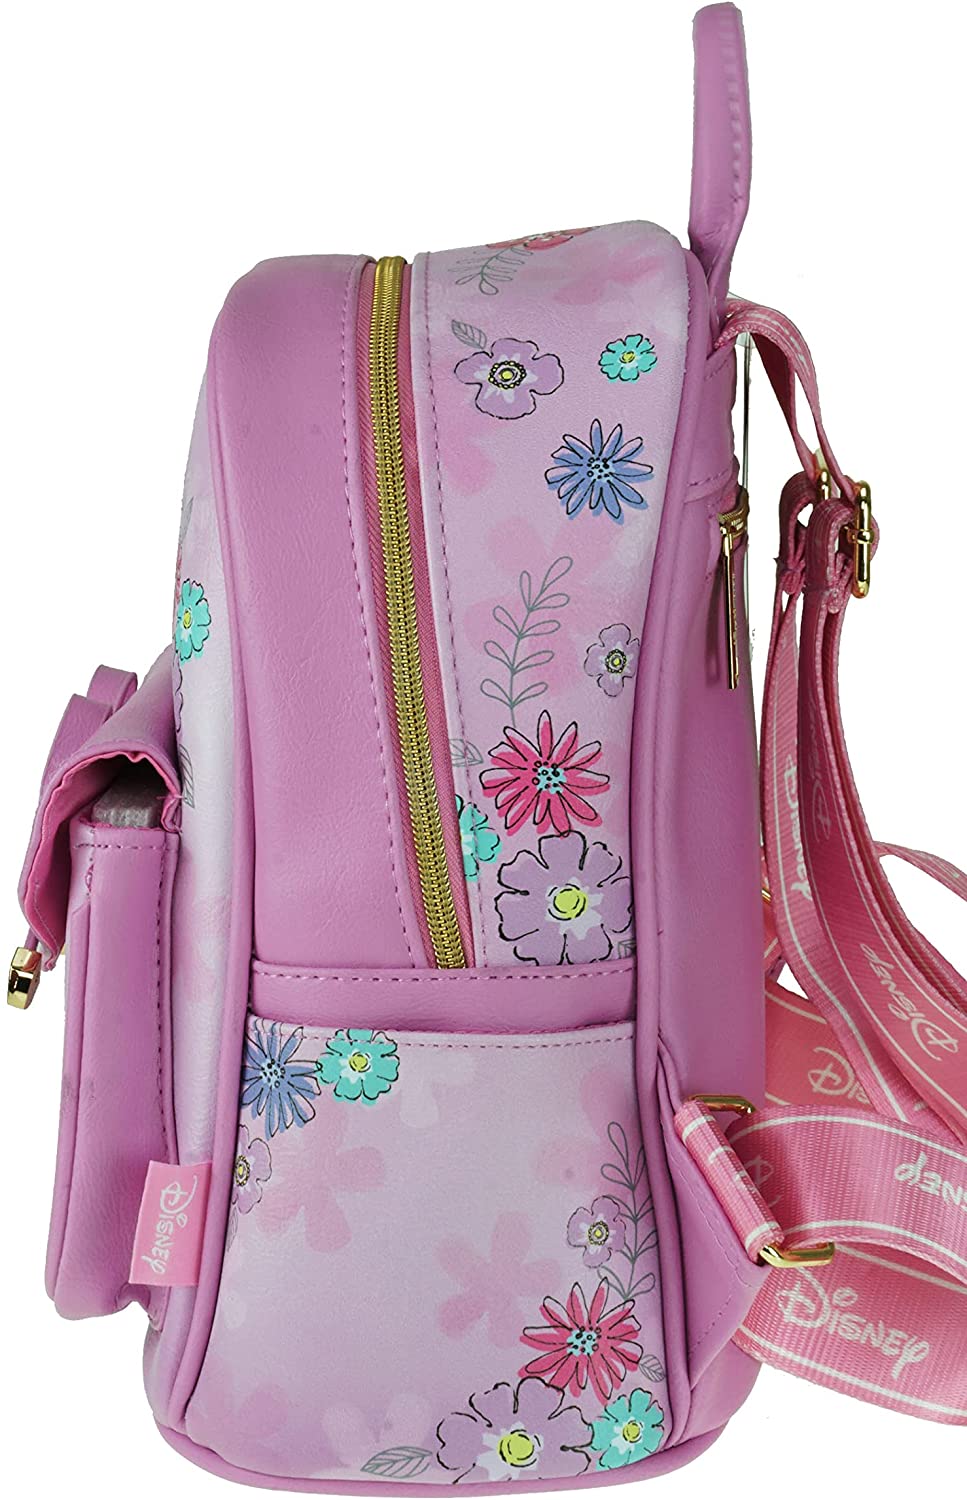 Aristocats - Marie 11" Vegan Leather Mini Backpack - A21726 - GTE Zone